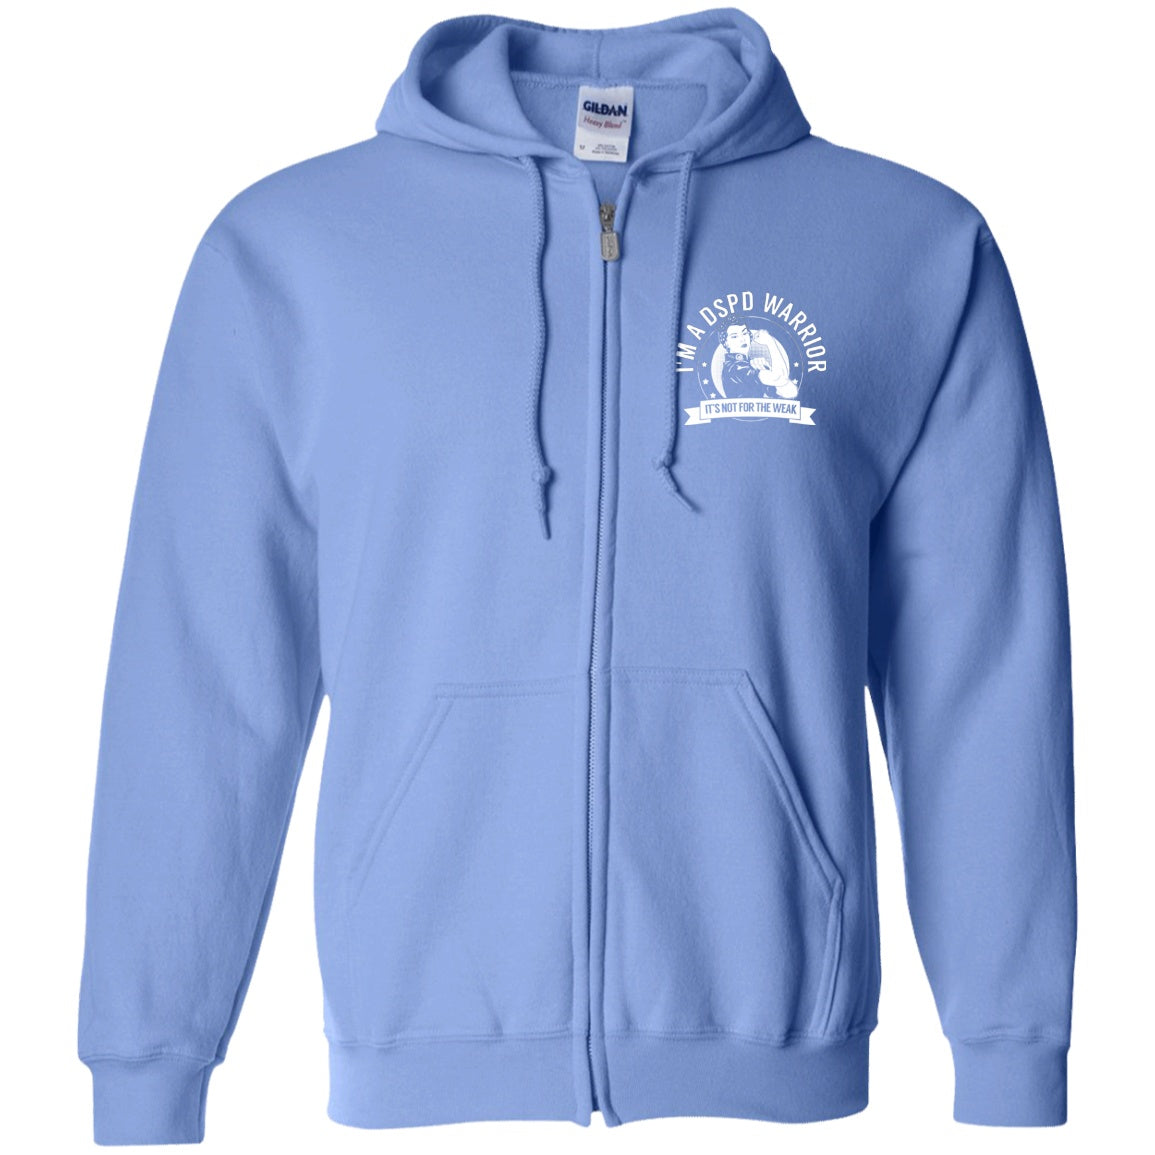 Delayed Sleep Phase Disorder - DSPD Warrior NFTW Zip Up Hooded Sweatshirt - The Unchargeables